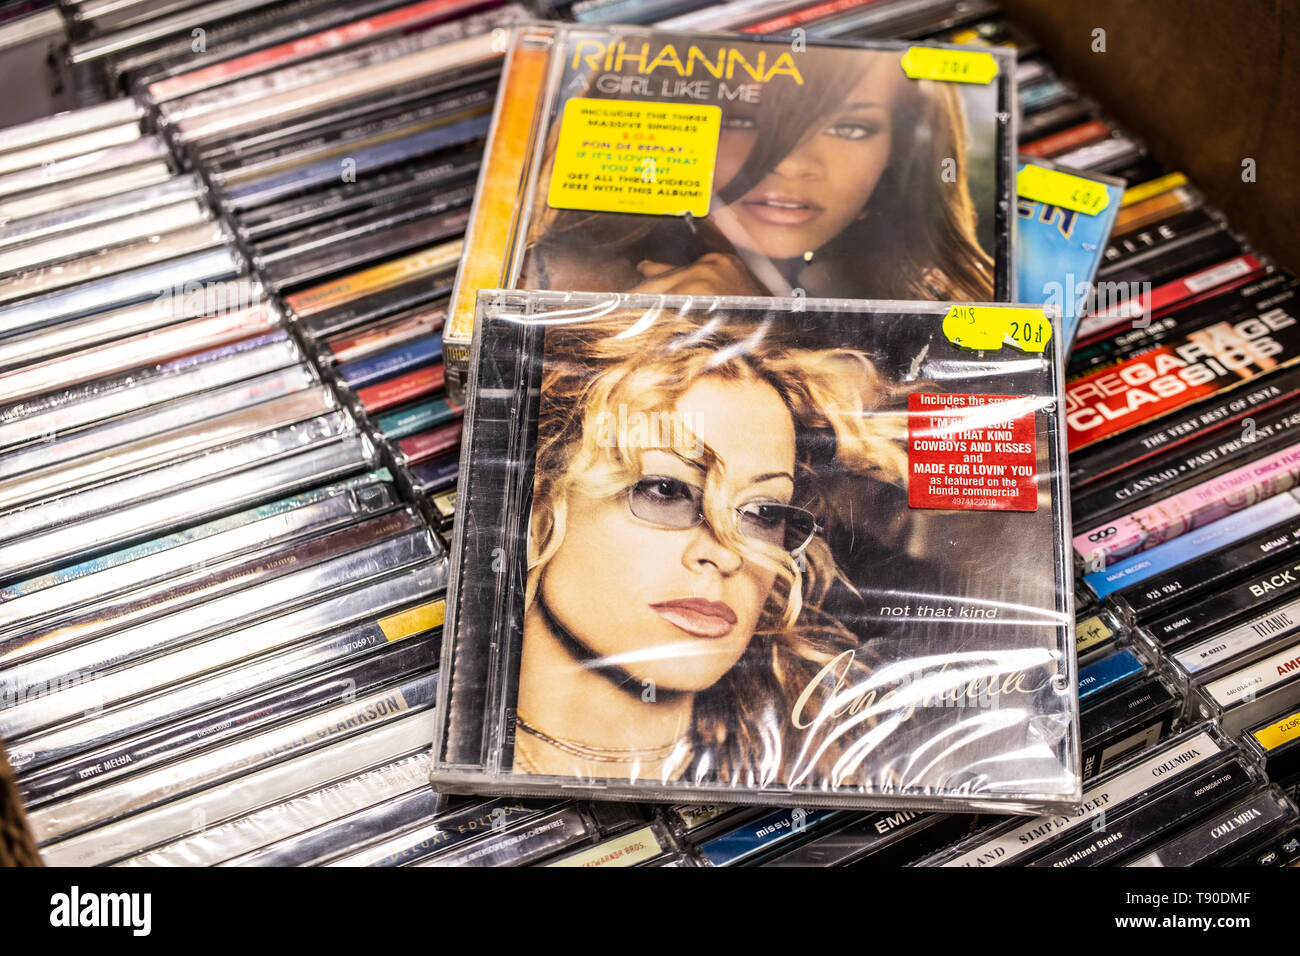 Nadarzyn, Poland, May 11, 2019: Anastacia CD album Not That Kind 2000 on display for sale, famous American singer and songwriter, collection of CDs Stock Photo